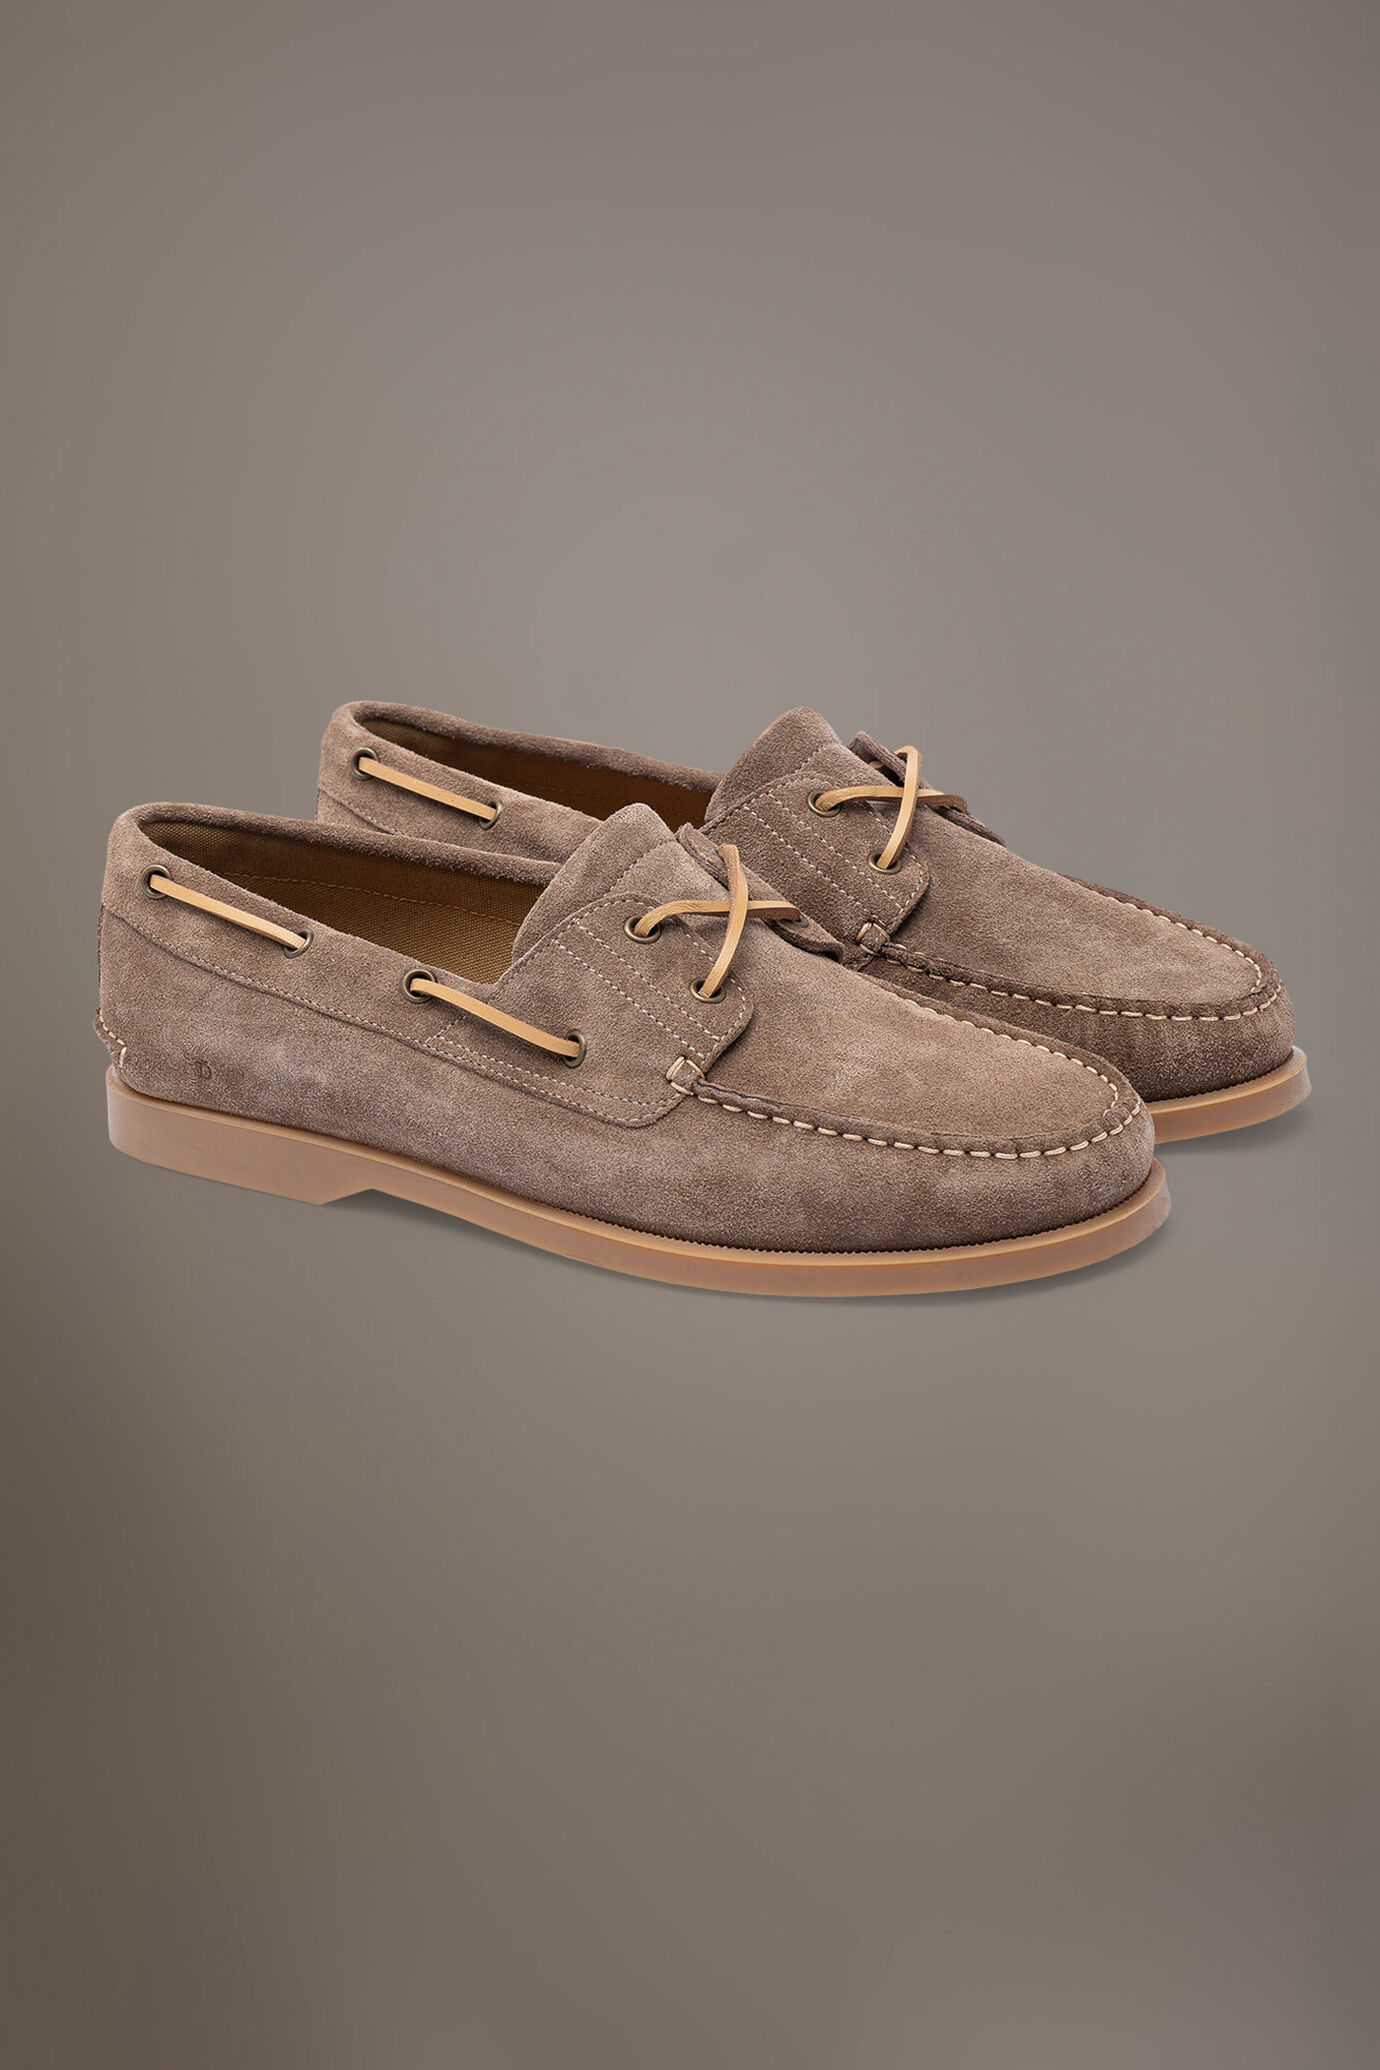 Suede boat shoes 100% leather with rubber sole